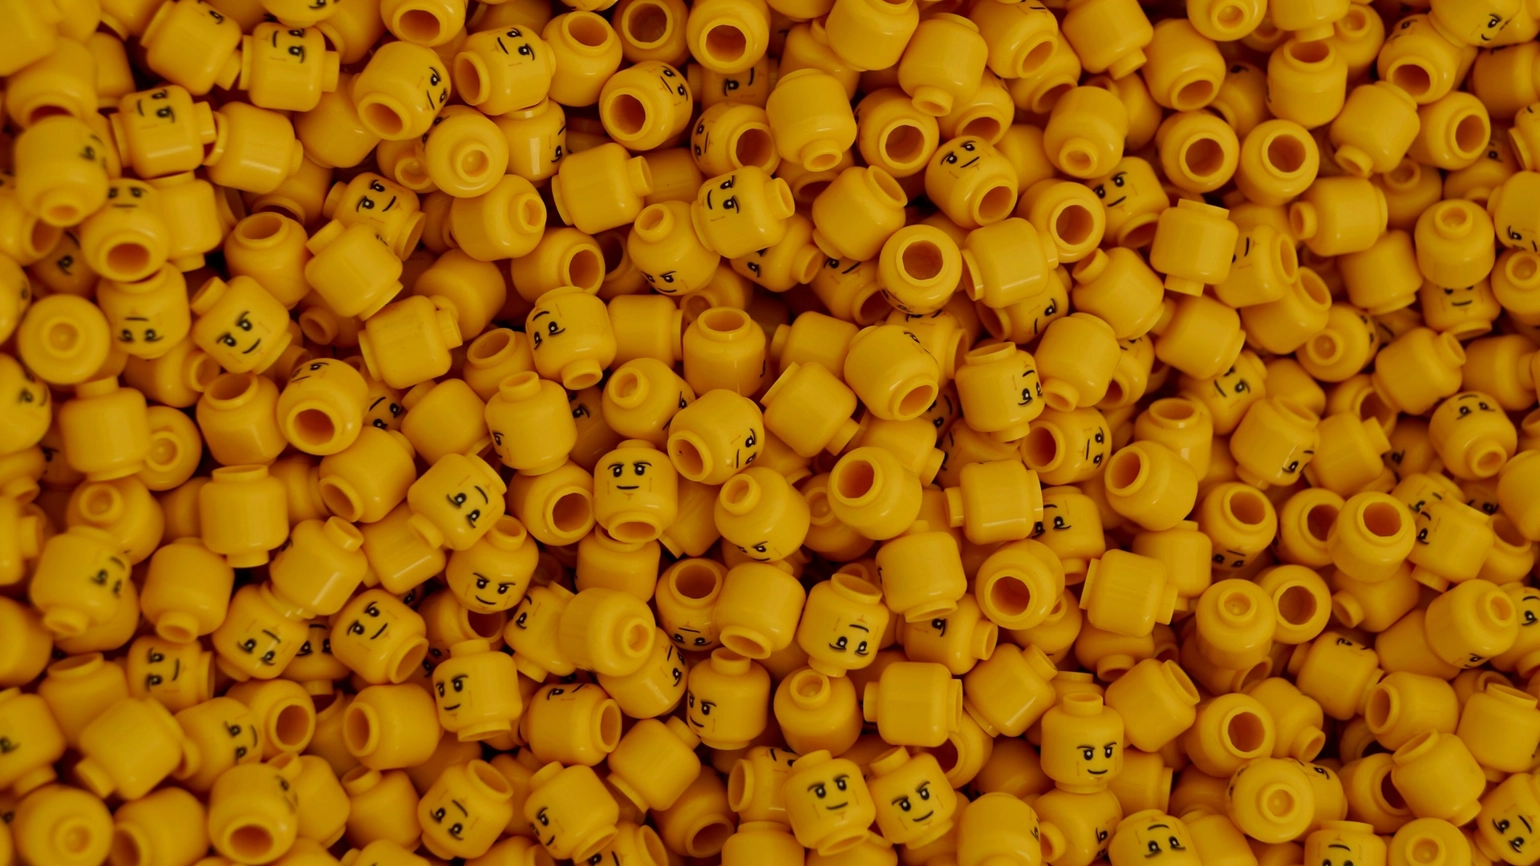 A pile of Lego toys 